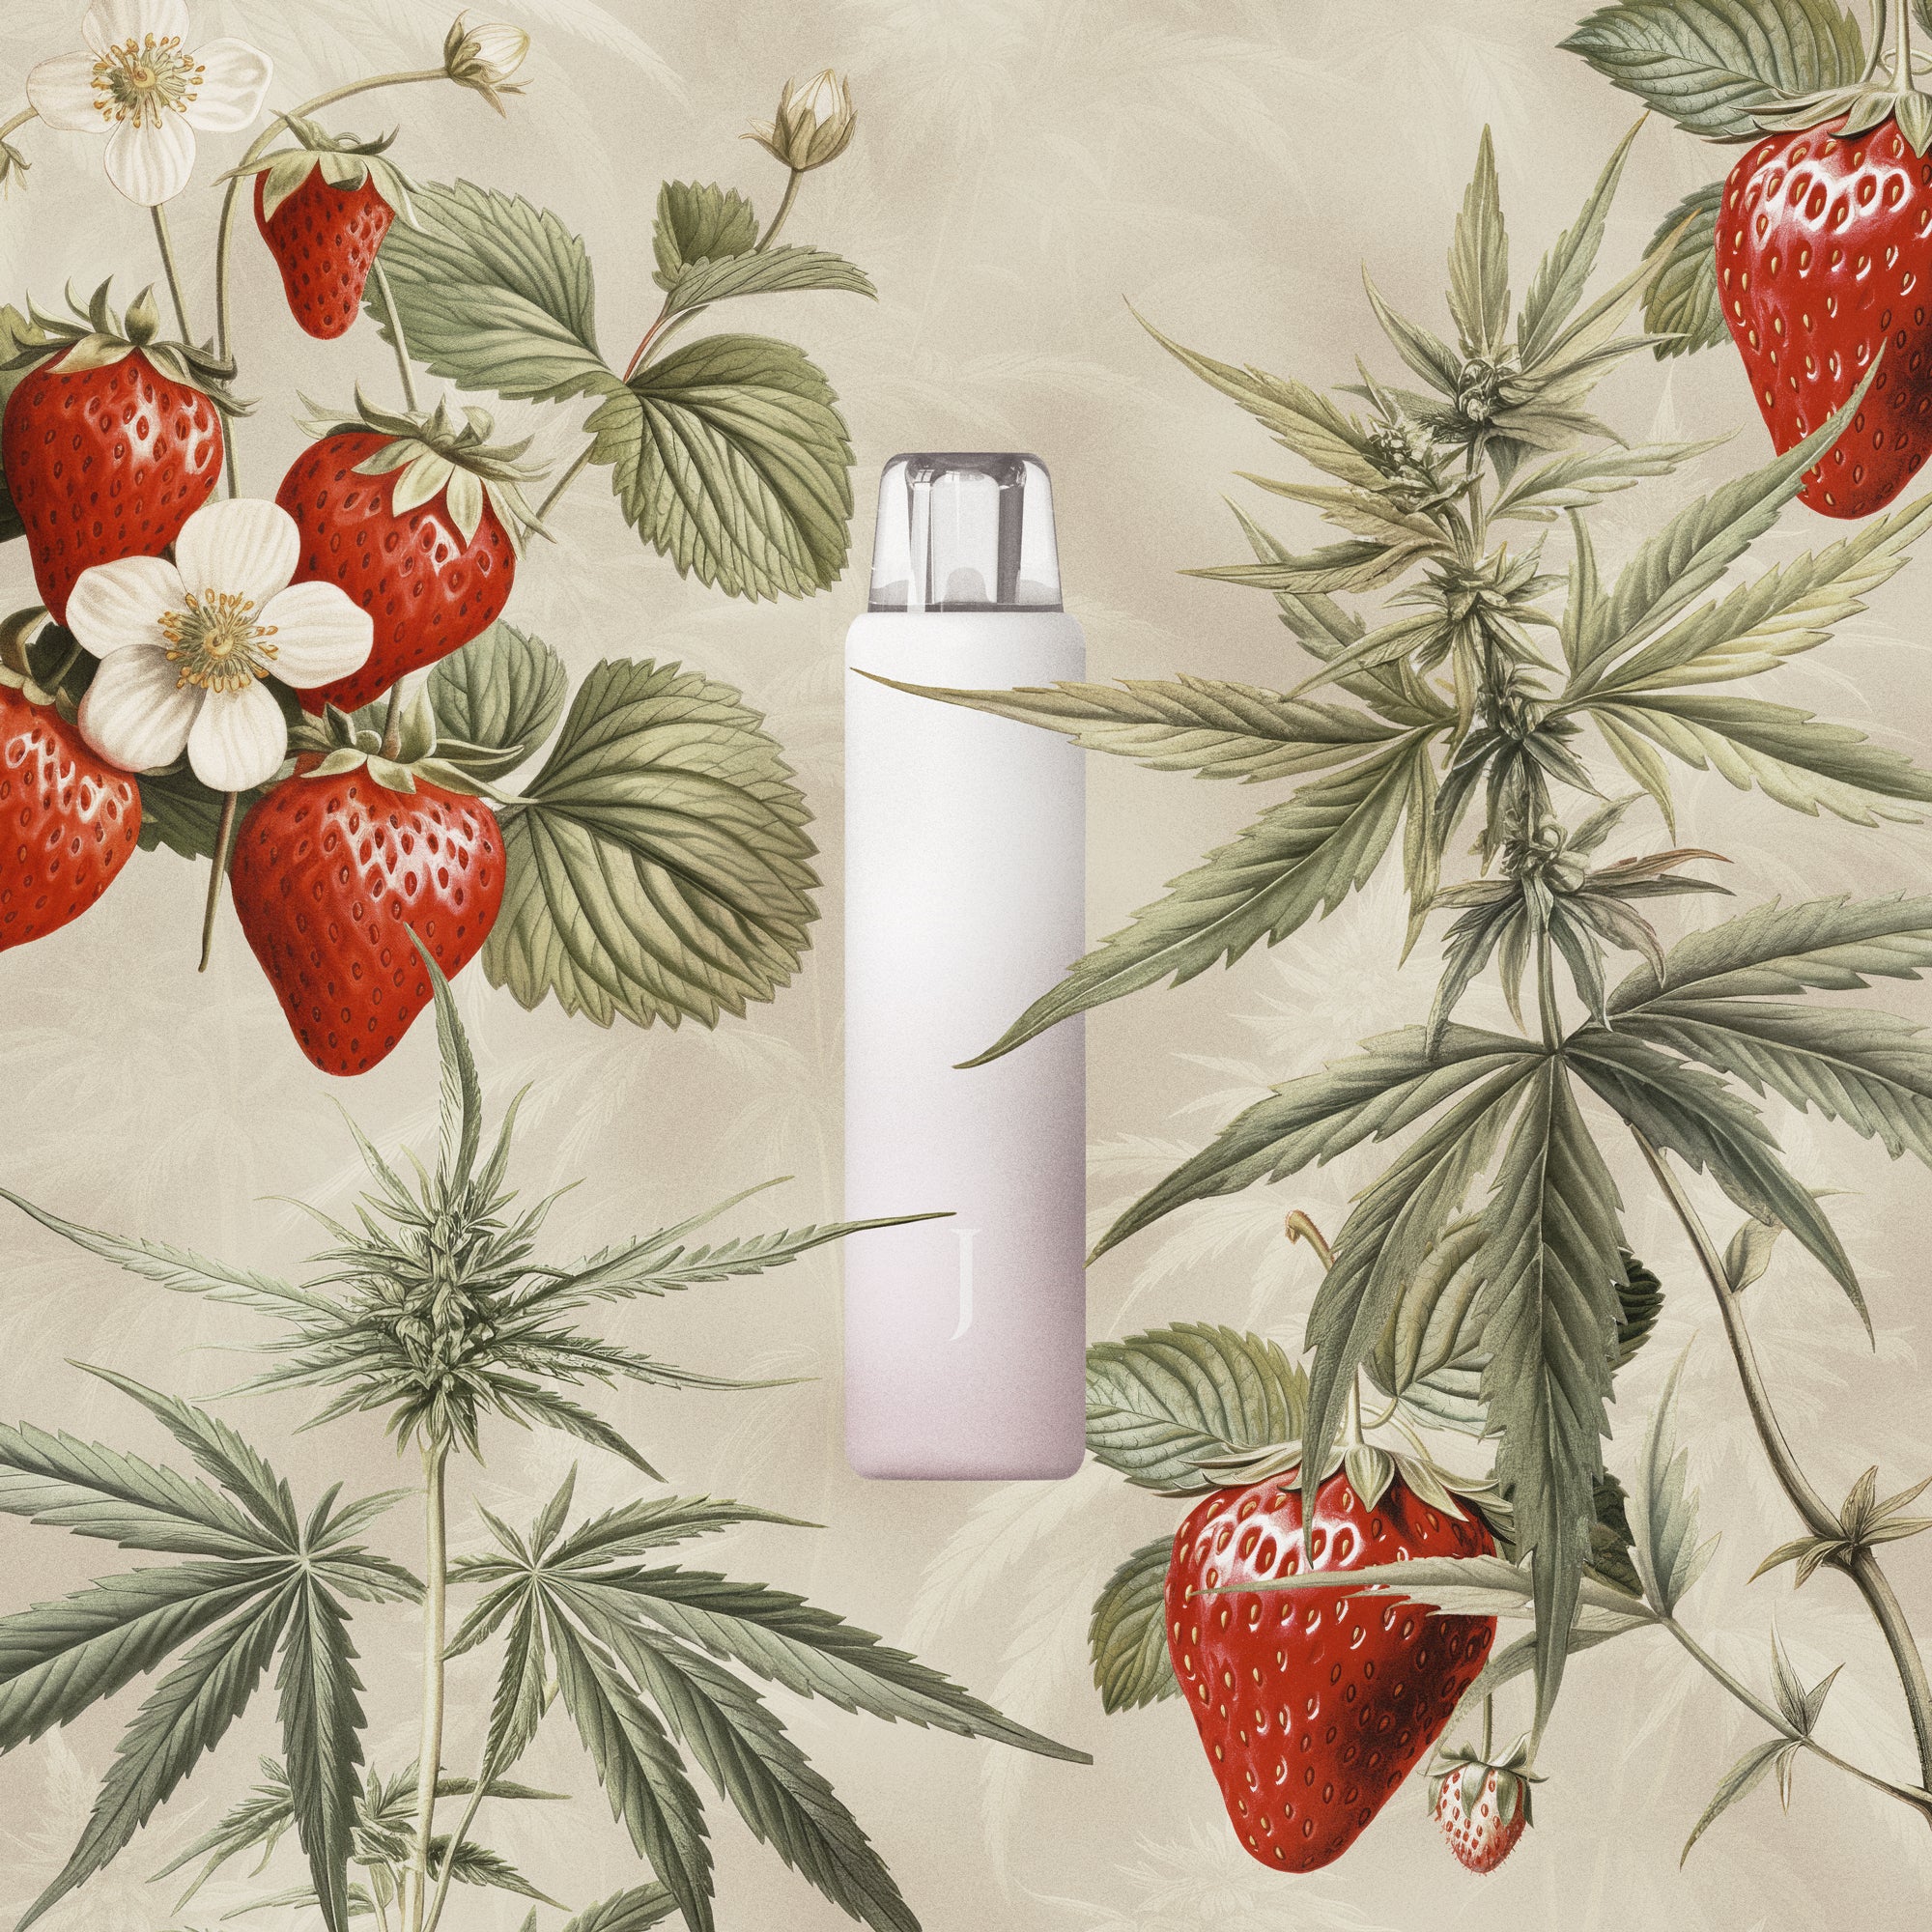 Juana All-in-One Cannabis Vape Pen with Marijuana Leaves and Strawberry Botanical Illustrations